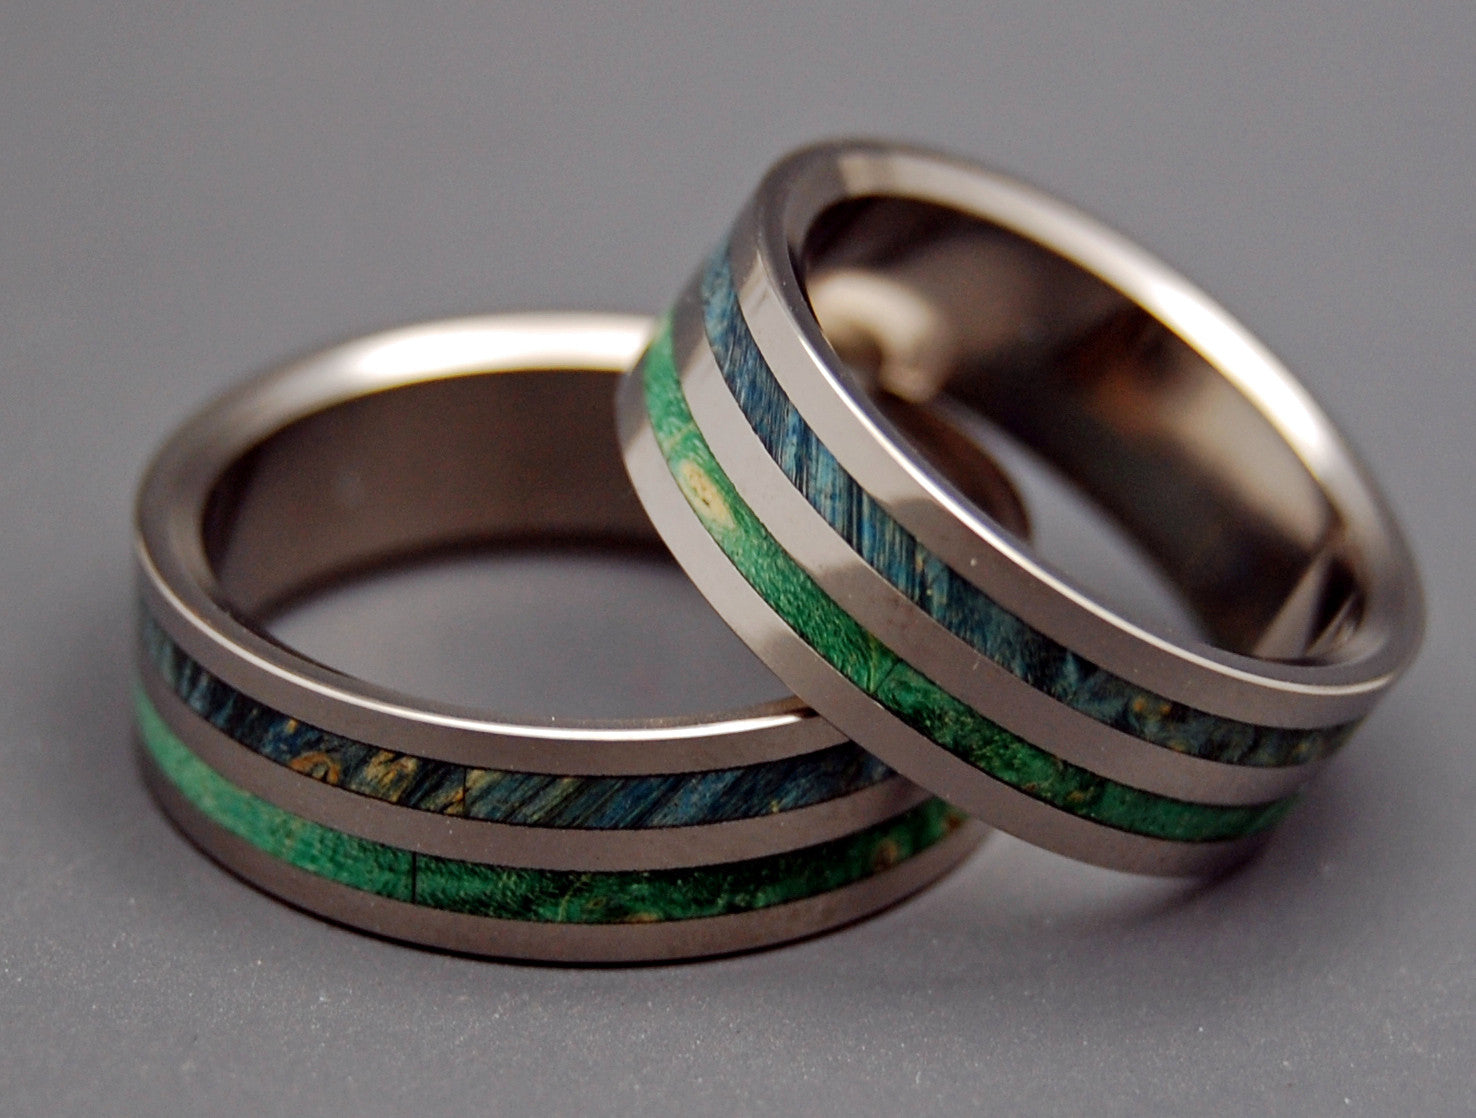 JUNGLE VINES | Box Elder Wood - Unique Wedding Rings - His and Hers Titanium Wedding Rings Set - Minter and Richter Designs